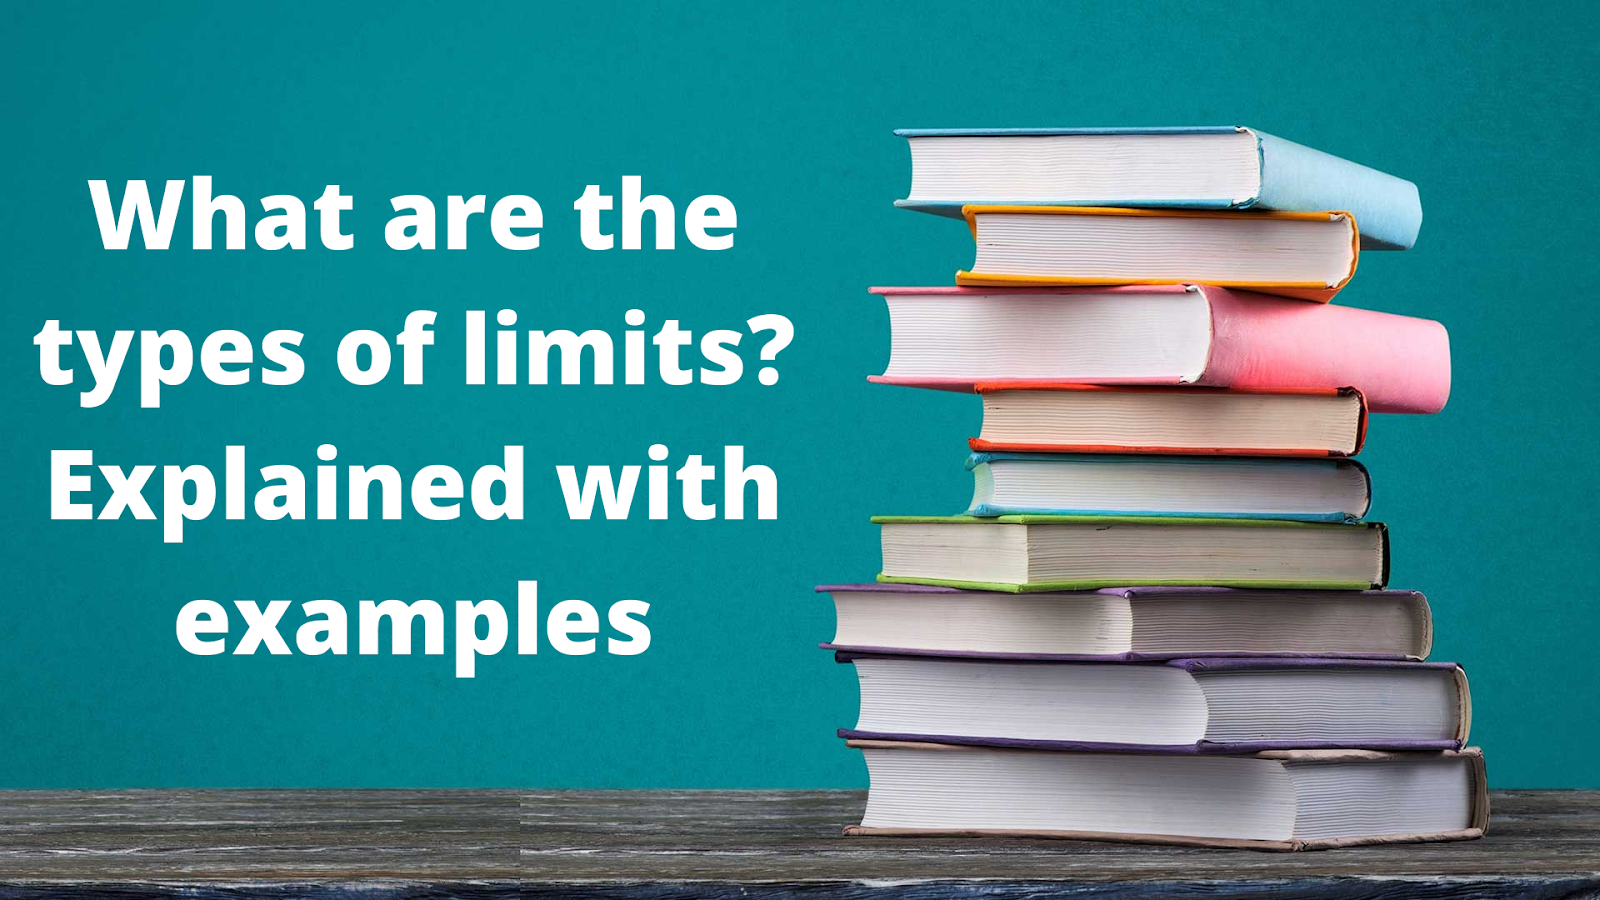 C:\Users\Zoobi\Downloads\What are the types of limits Explained with examples (1).png